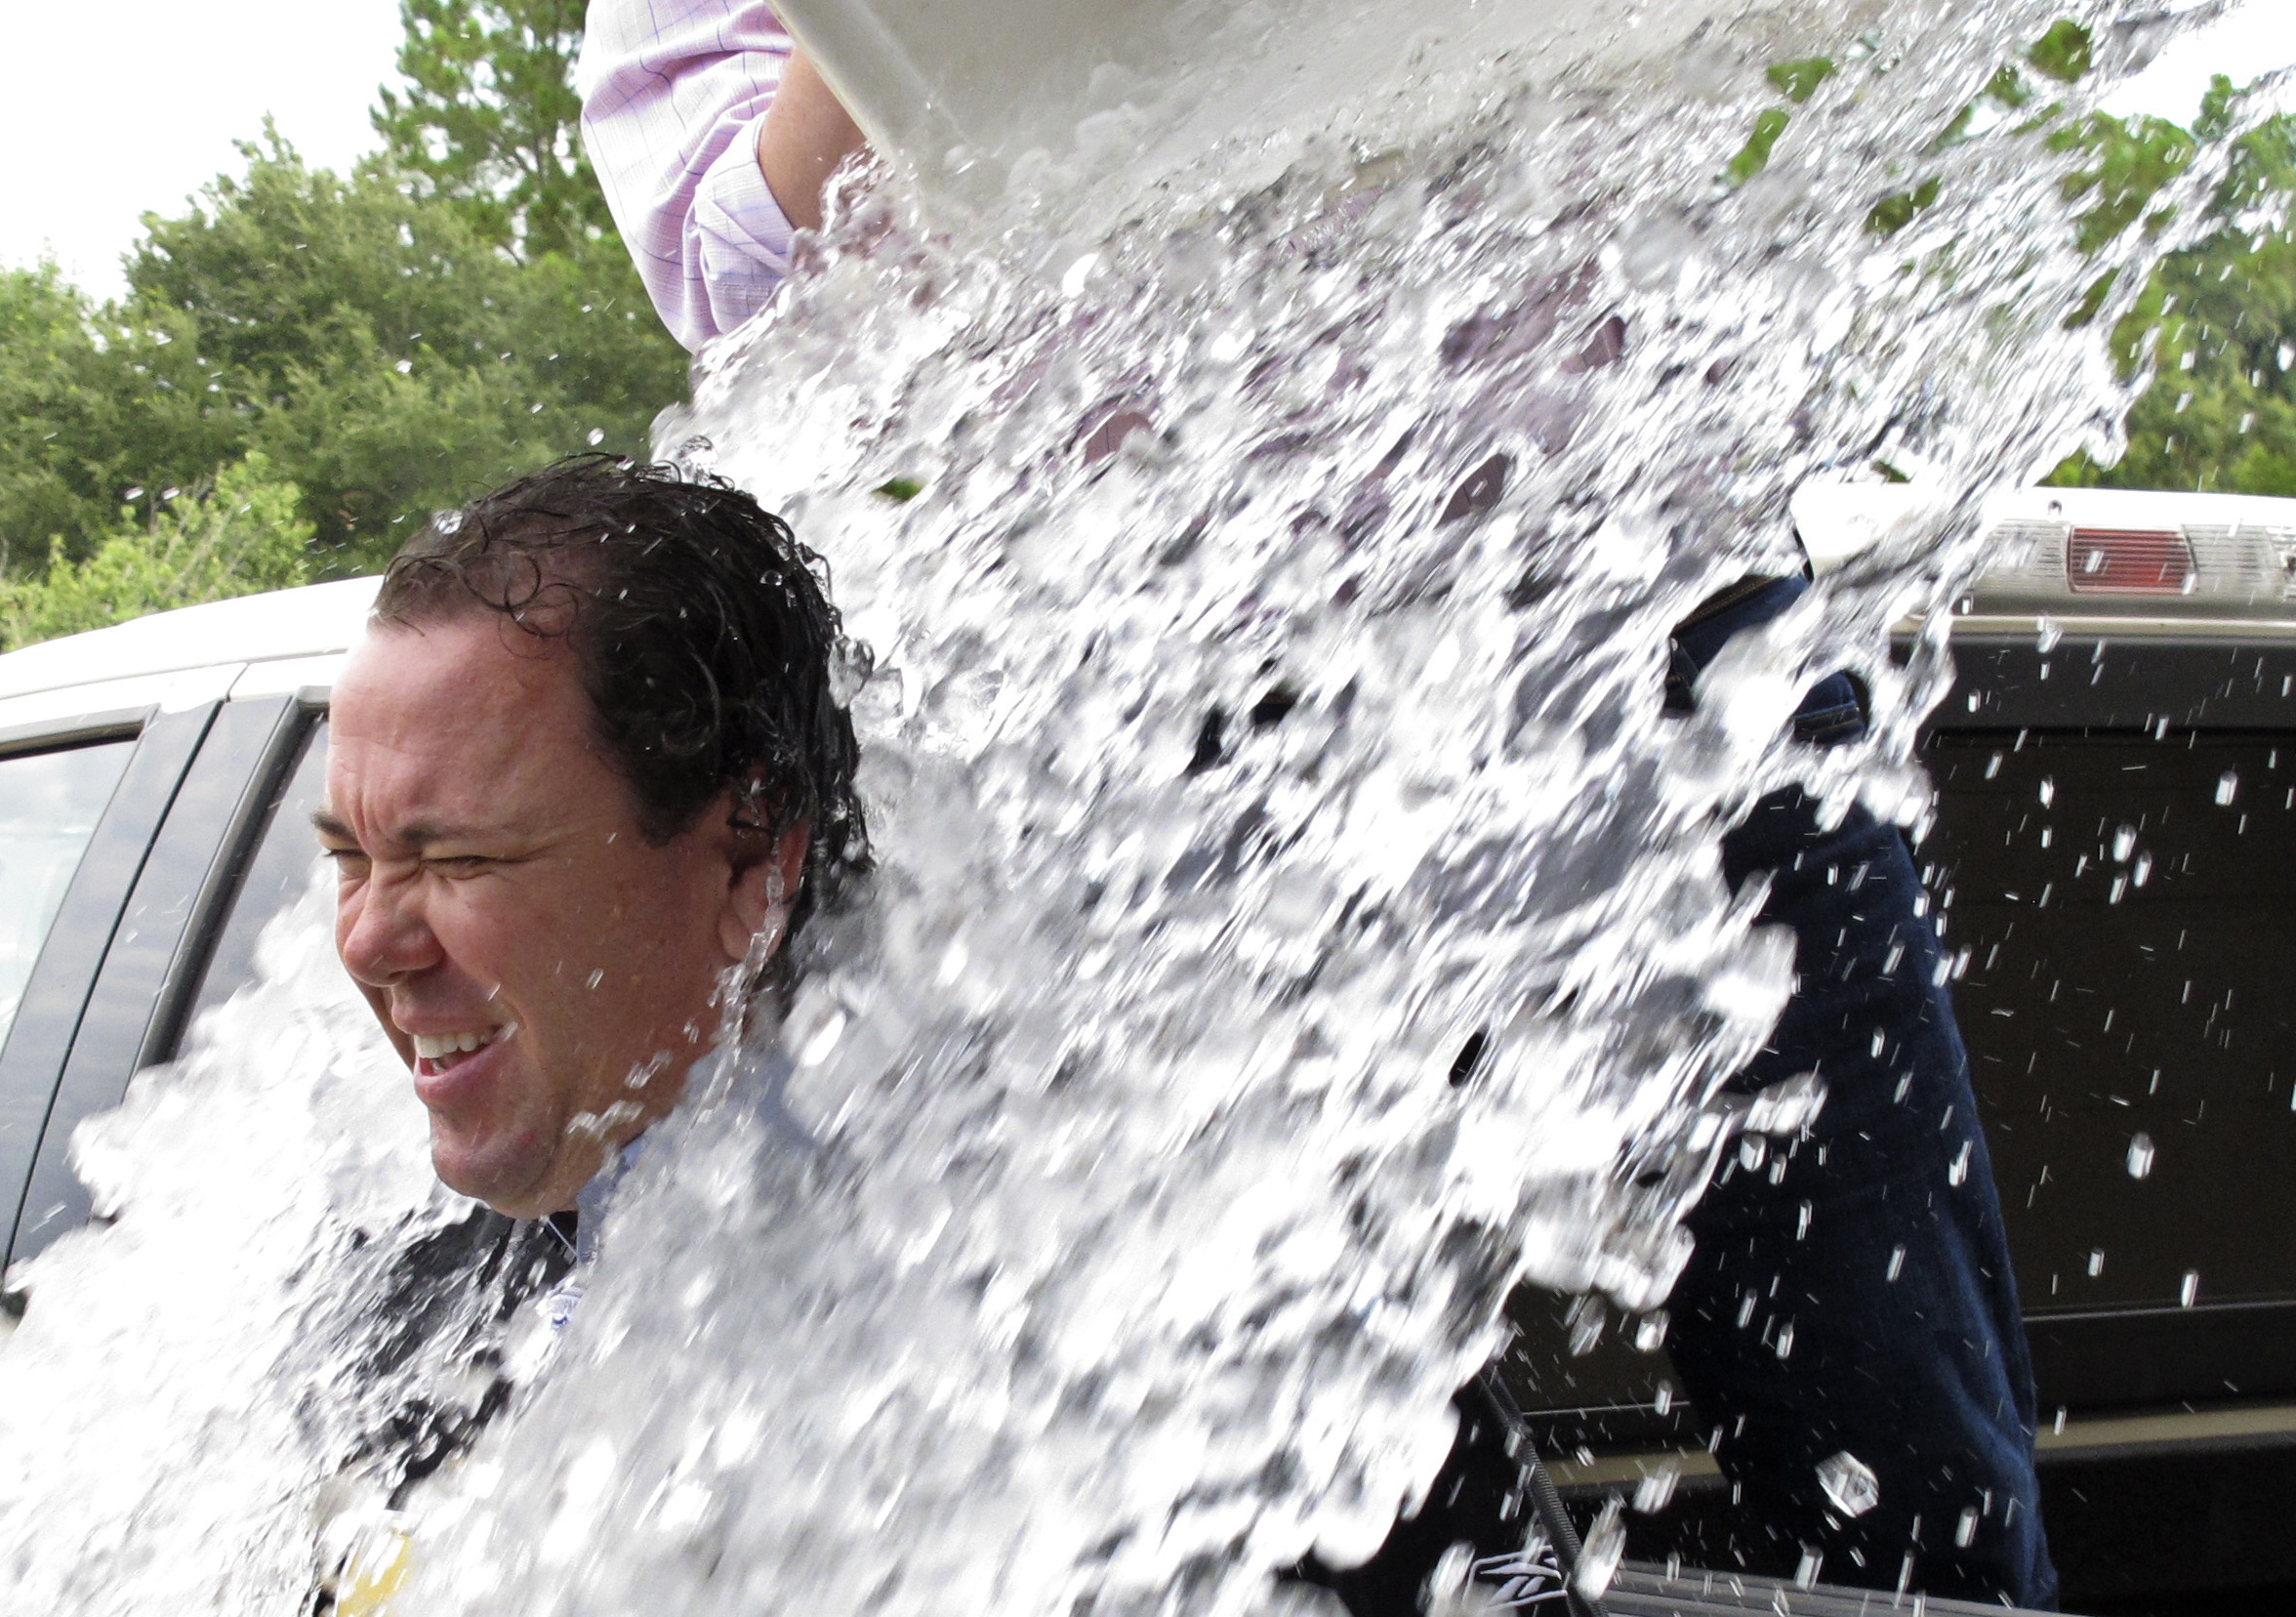 PHOTO: U.S. Rep. Vance McAllister is doused as he takes the strikeout ALS ice bucket challenge after qualifying for his re-election bid Friday, Aug. 22, 2014, in Baton Rouge, La. 